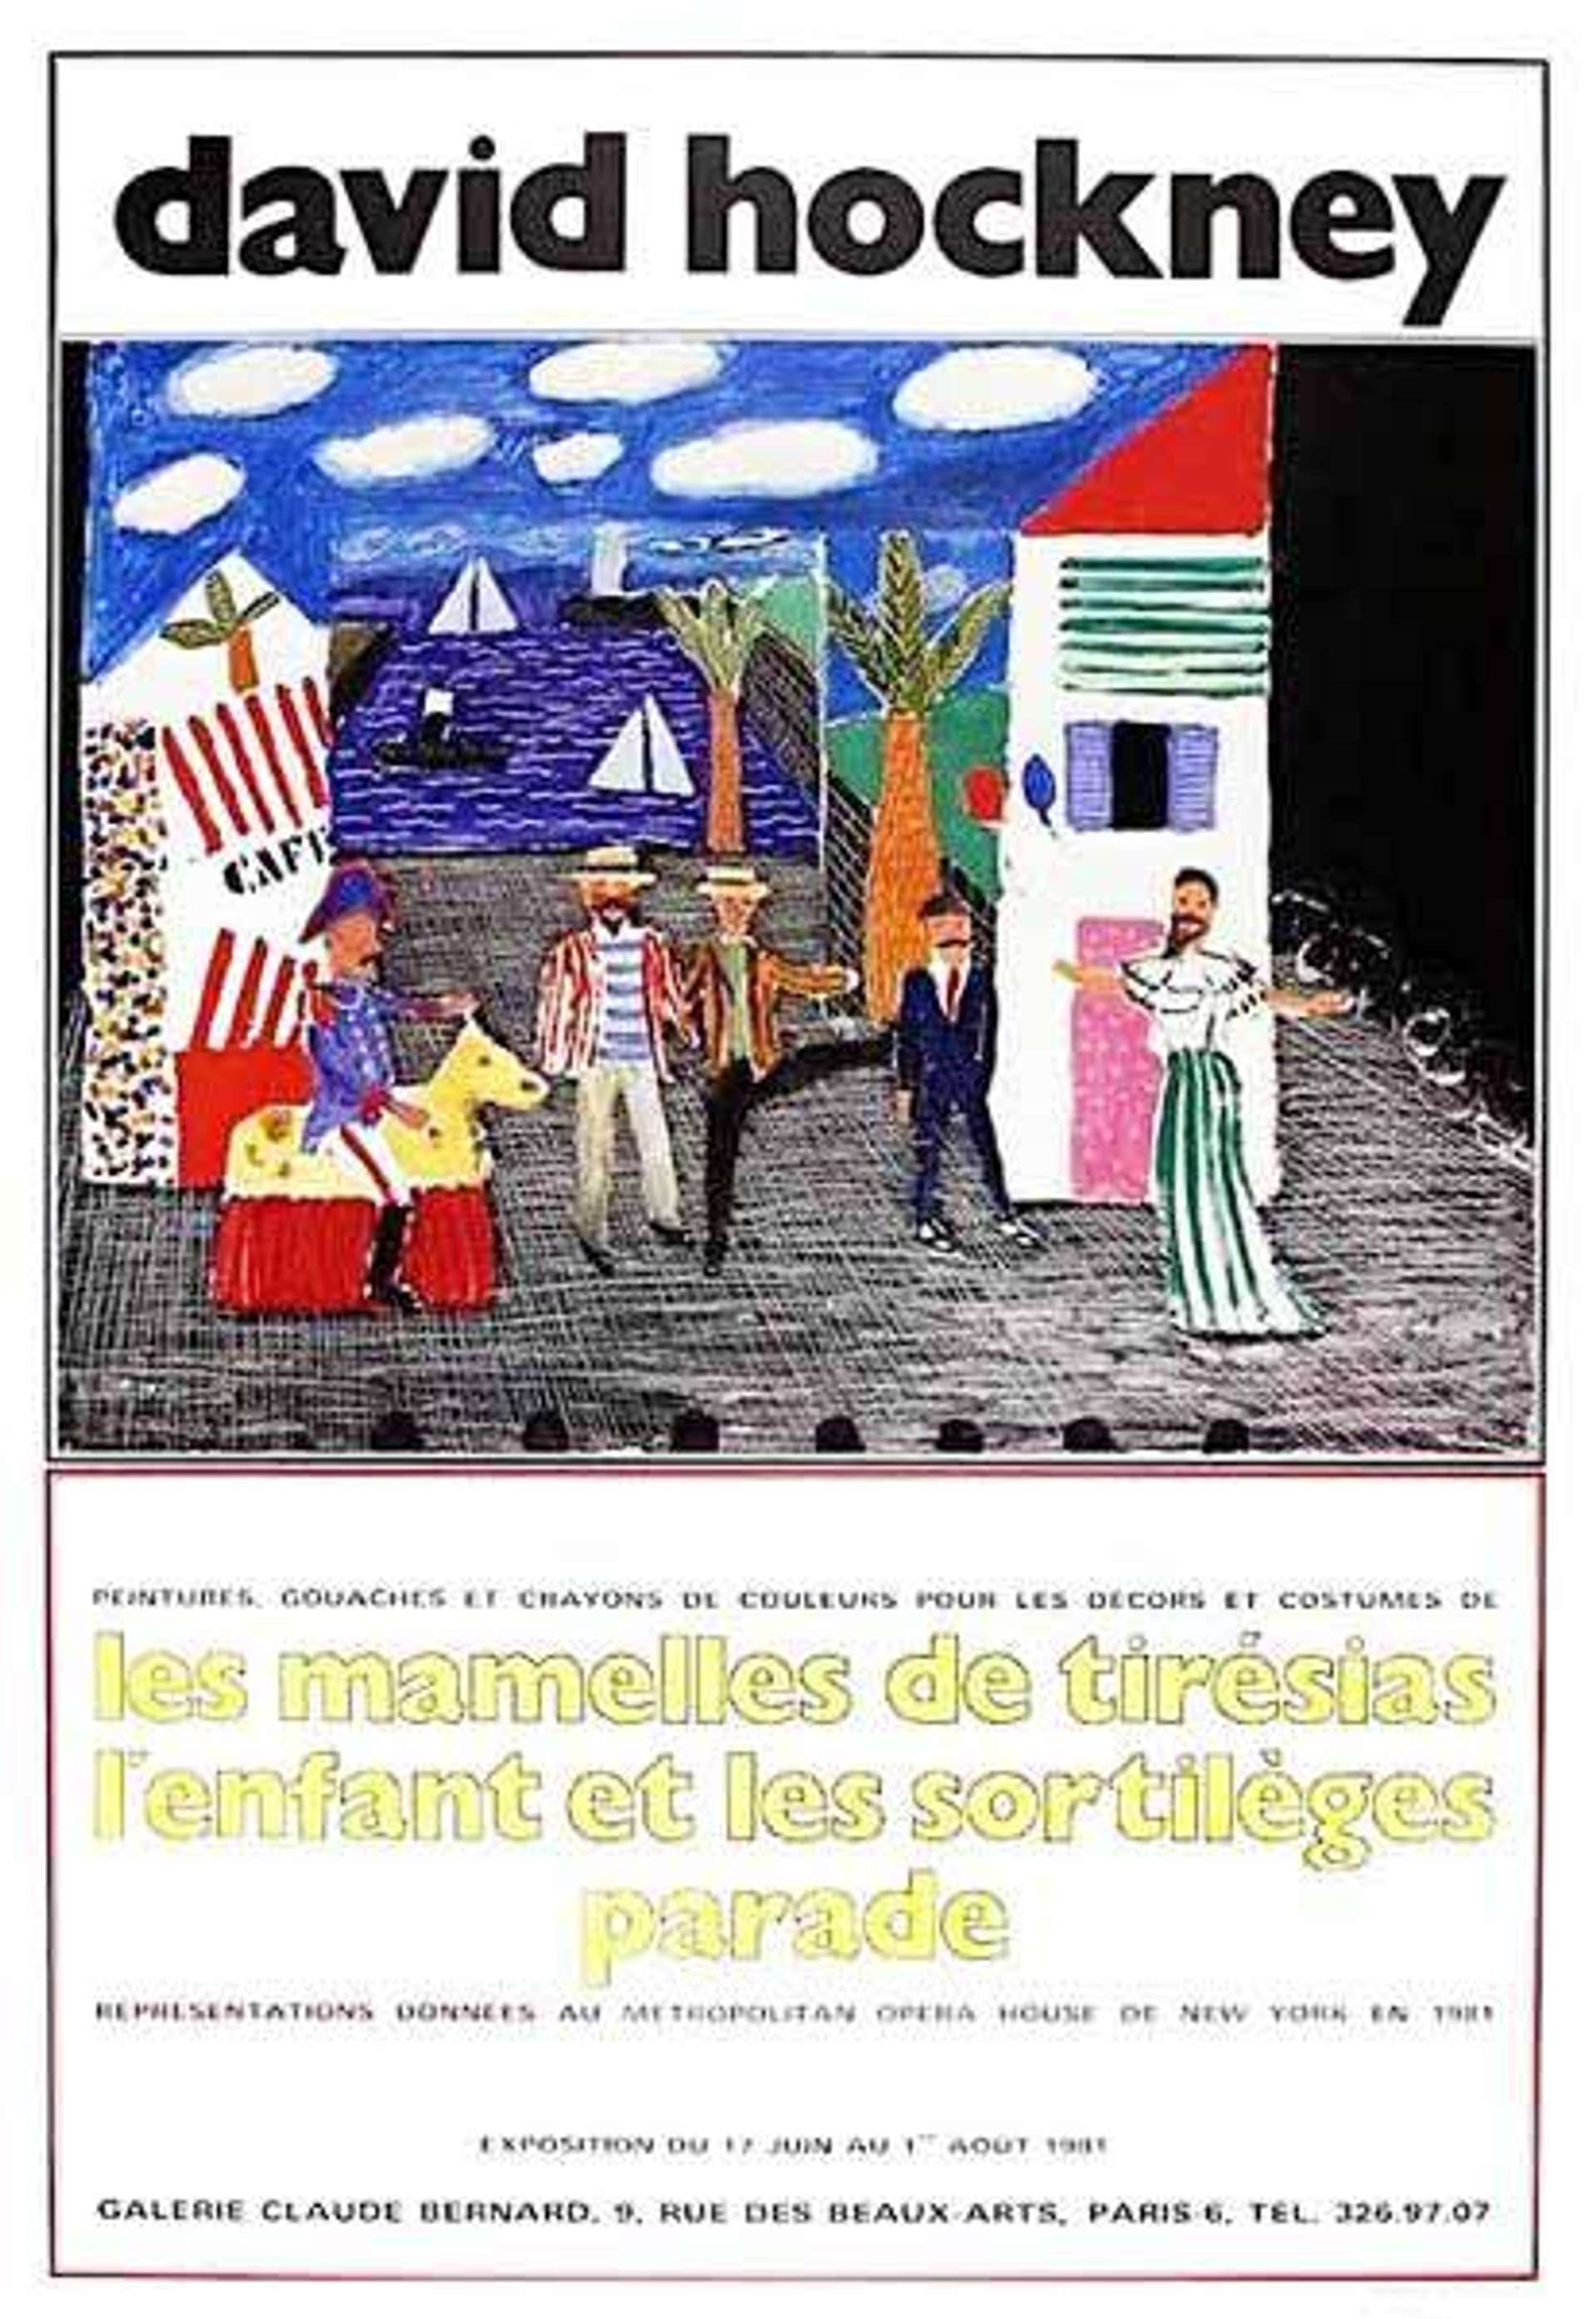 This poster for an opera by David Hockney shows several figures standing on a town square, as a maritime scene unfolds in the background.